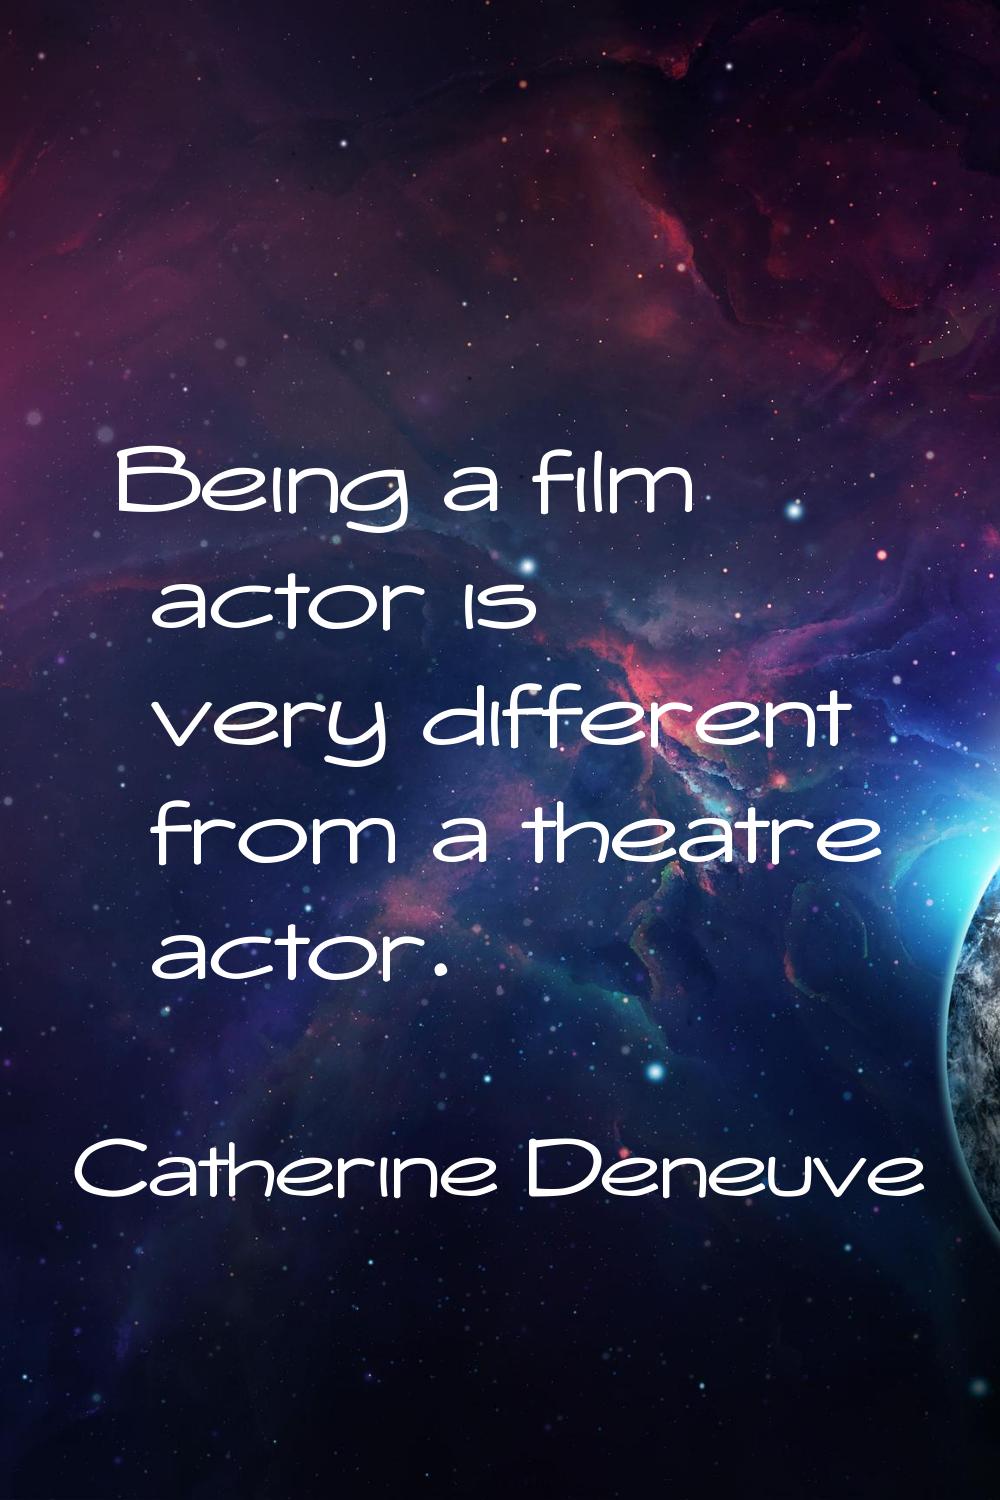 Being a film actor is very different from a theatre actor.